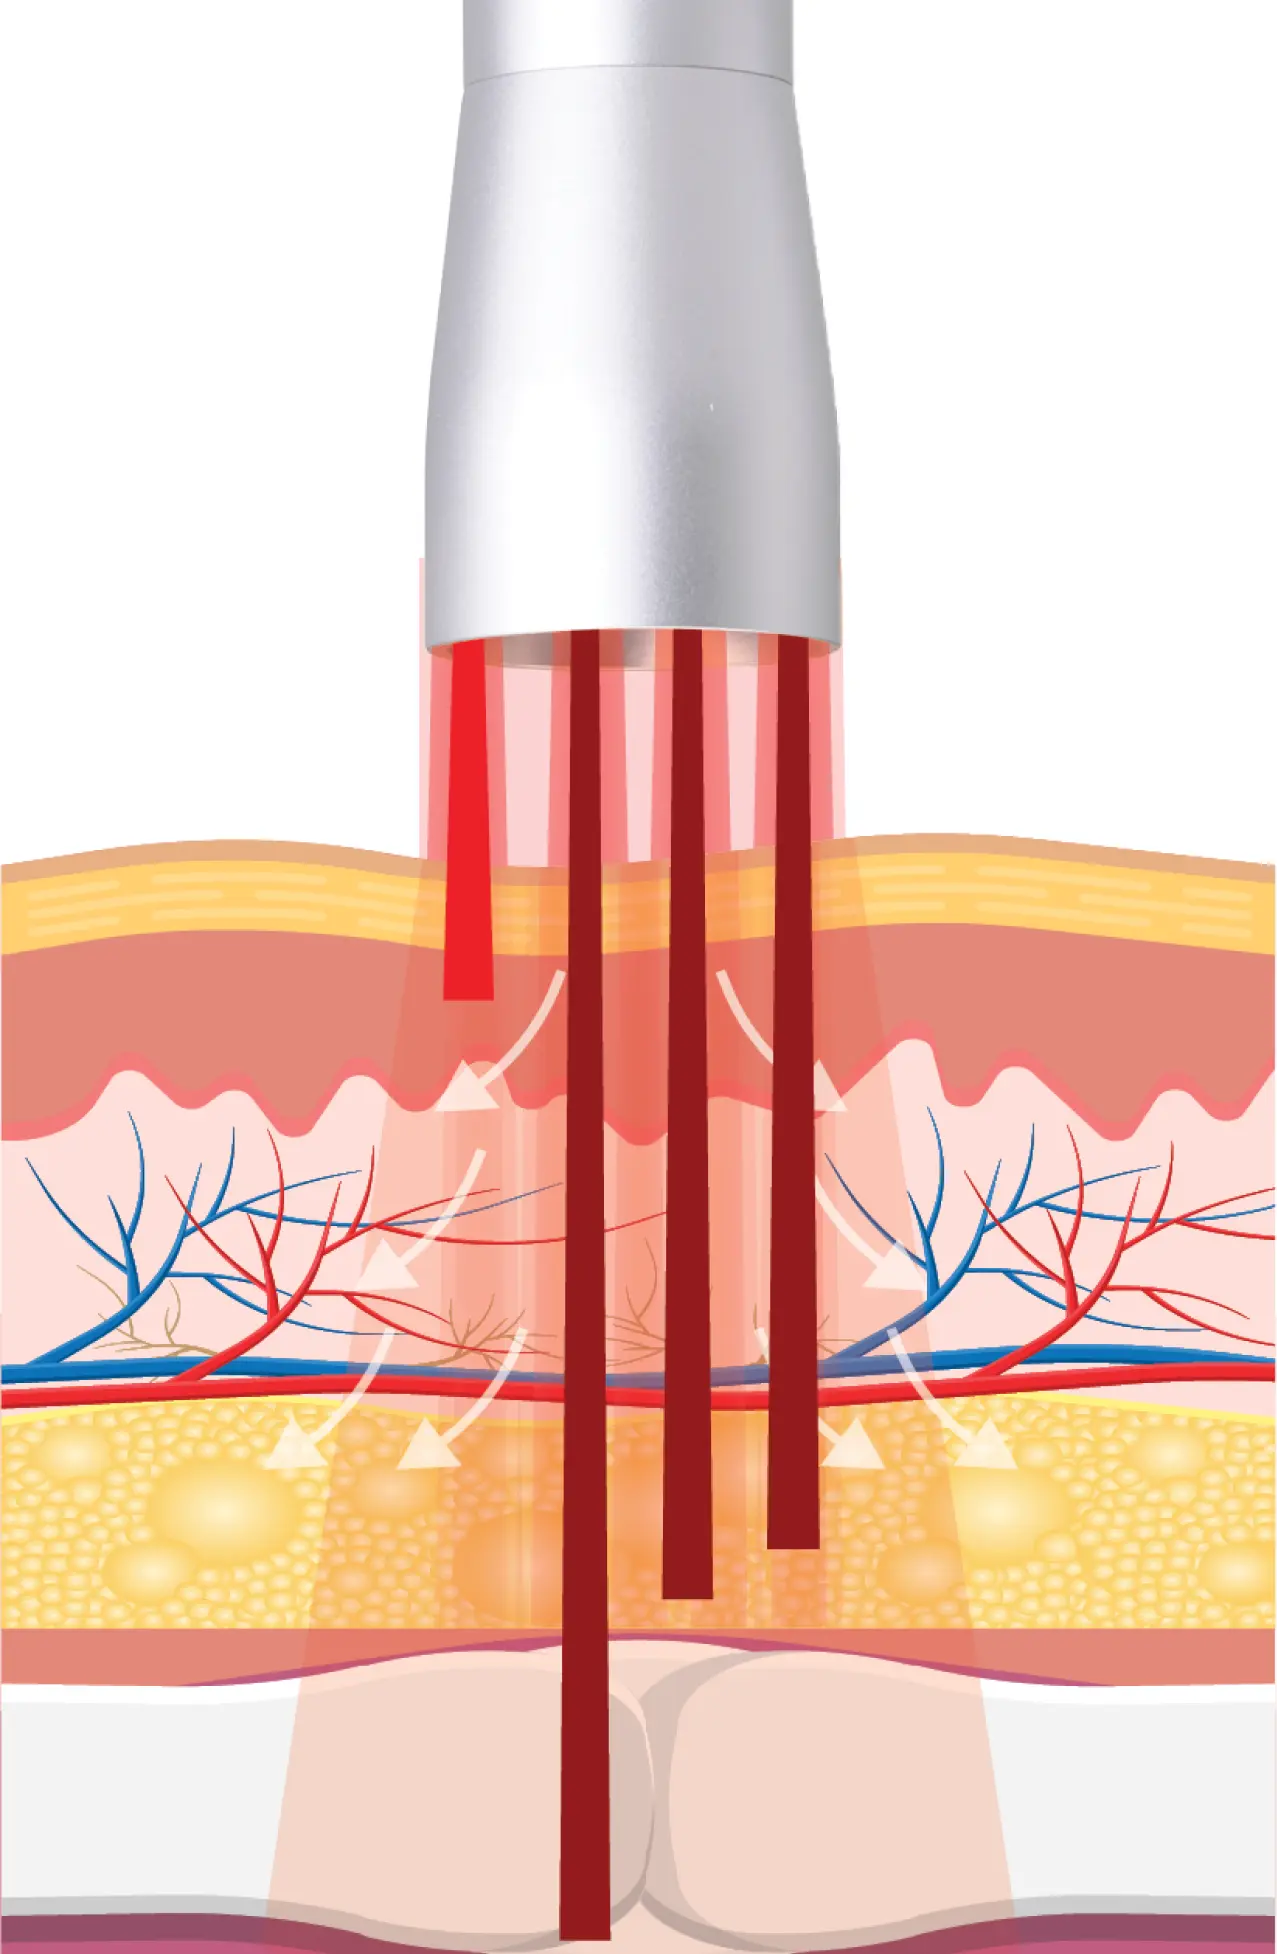 Laser infographic of the Summus light therapy